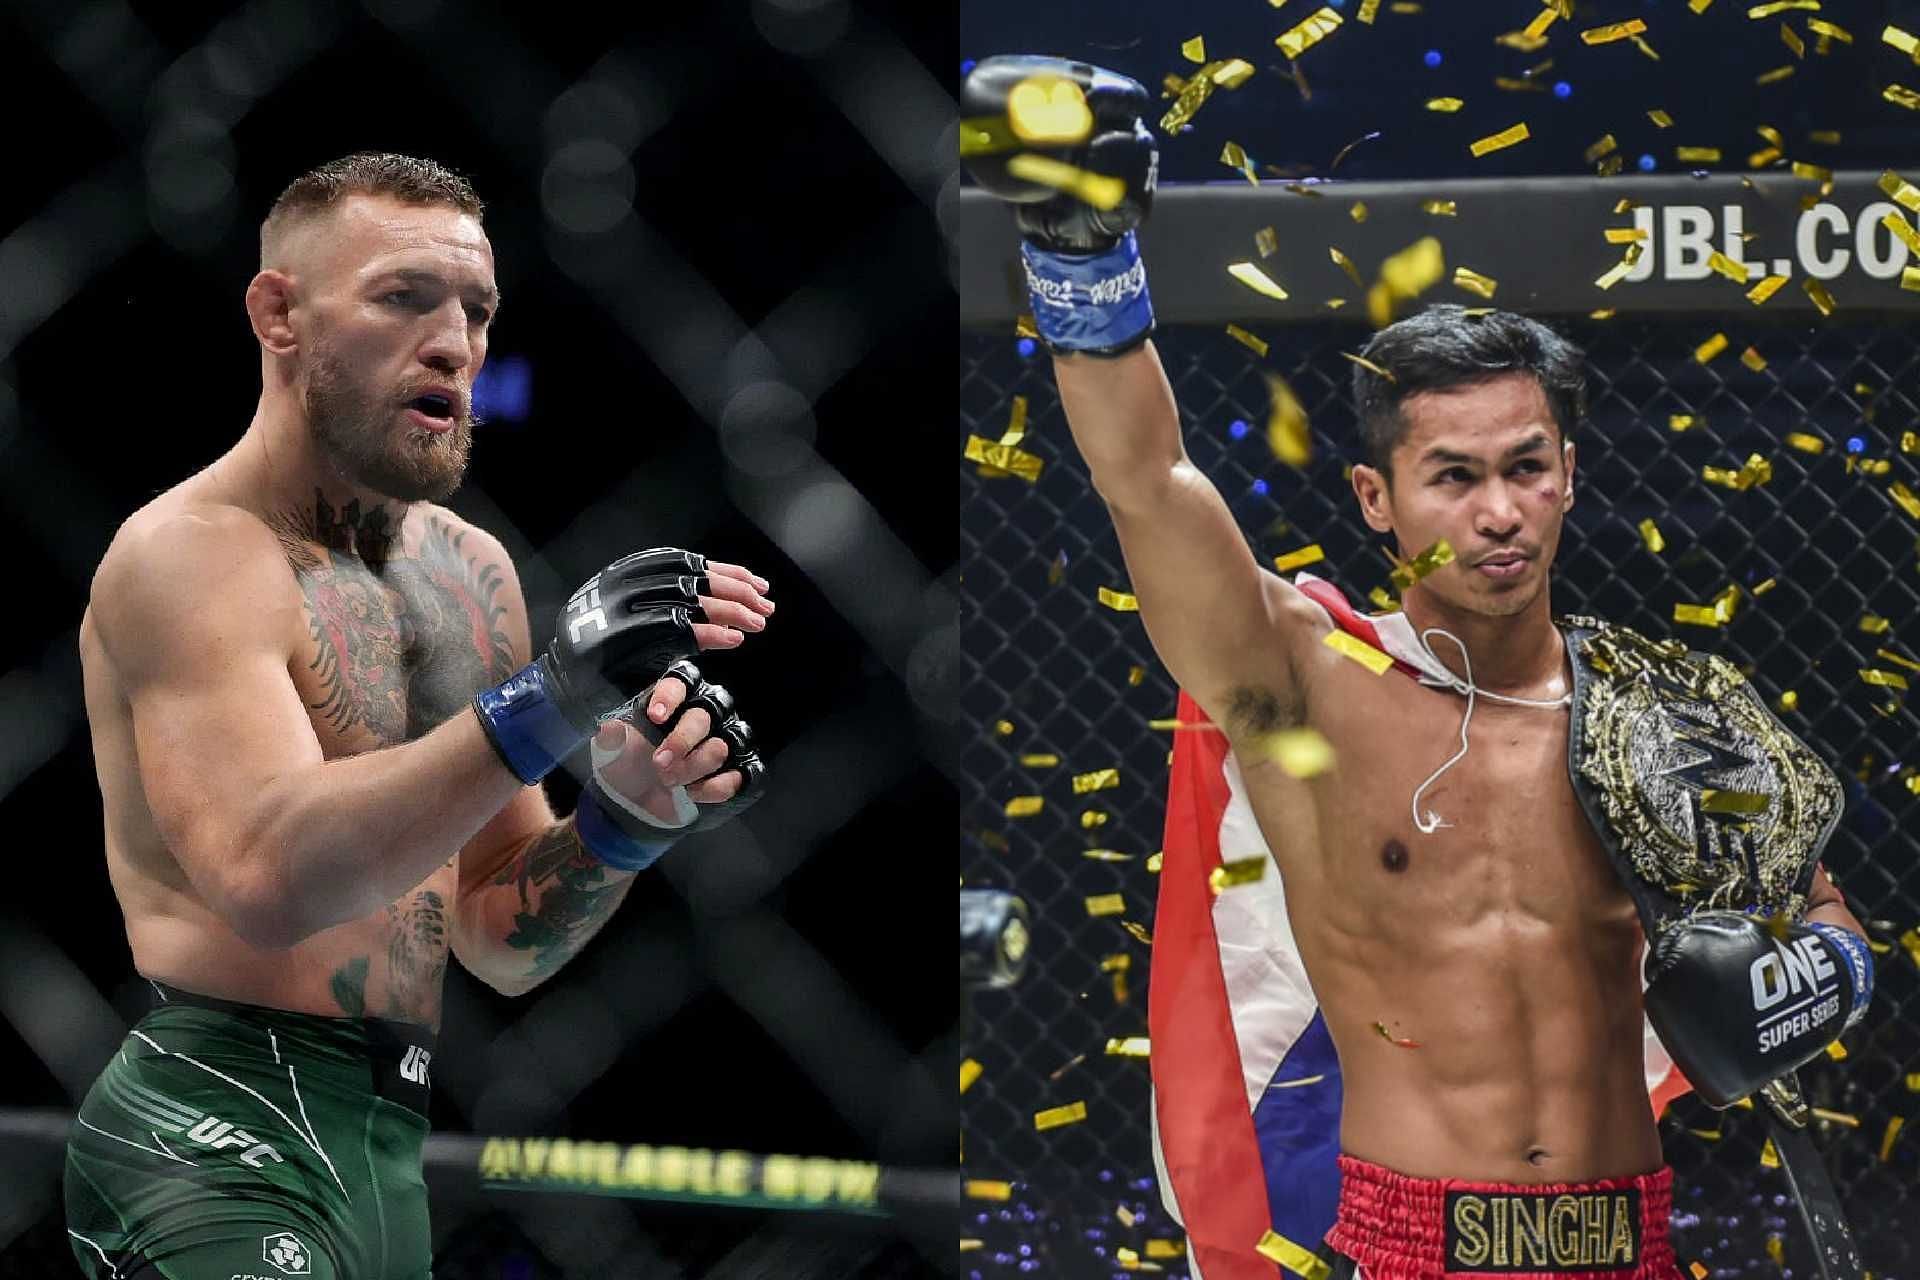 ONE featherweight kickboxing champion Superbon (right) dismisses Conor McGregor&#039;s (left) striking capabilities. [Photo Getty Images, ONE Championship]